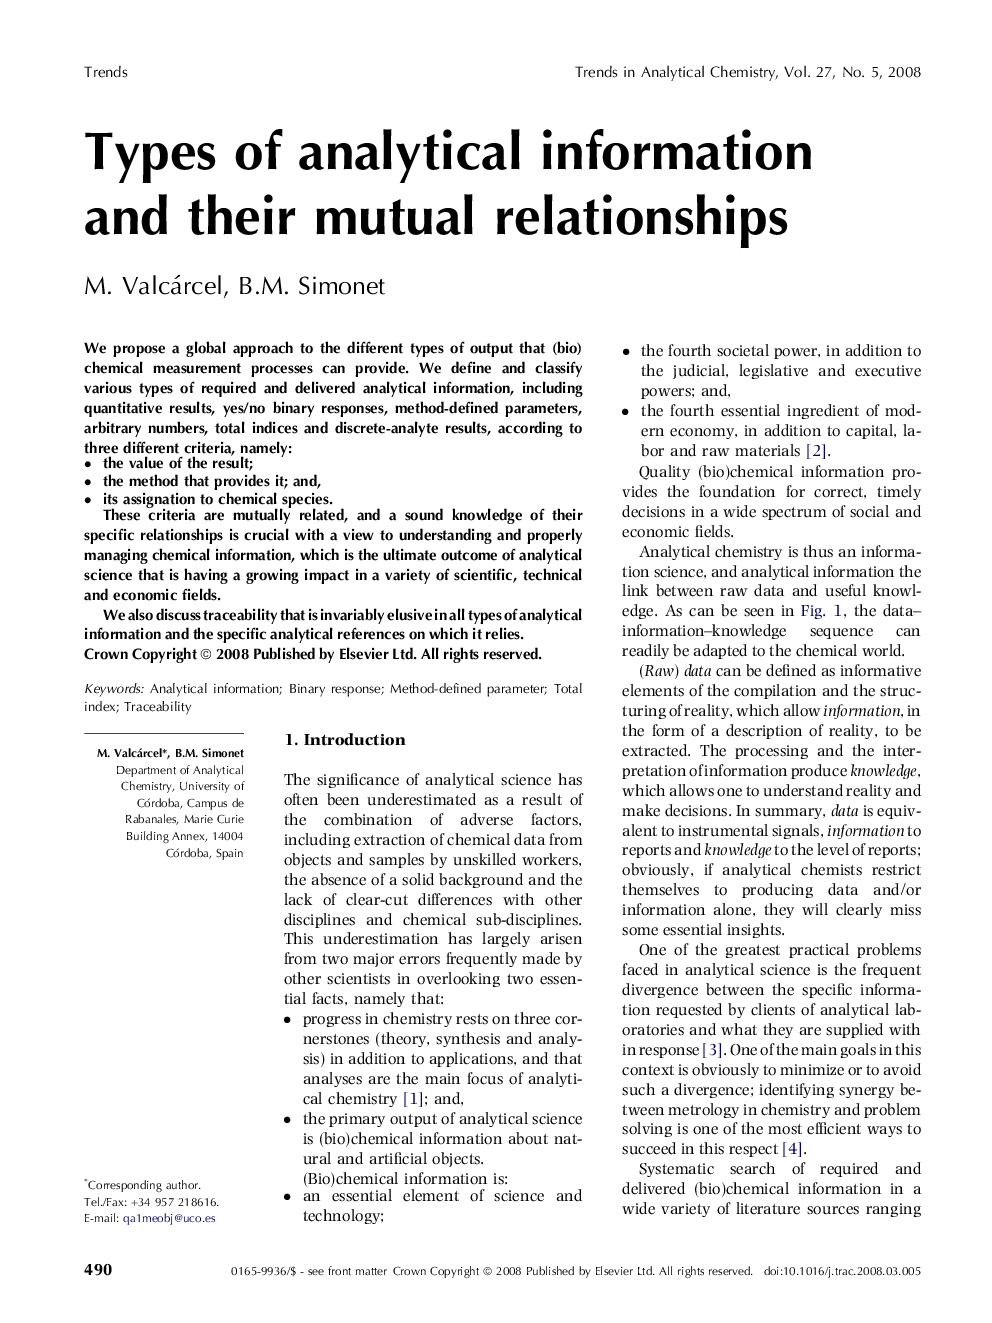 Types of analytical information and their mutual relationships